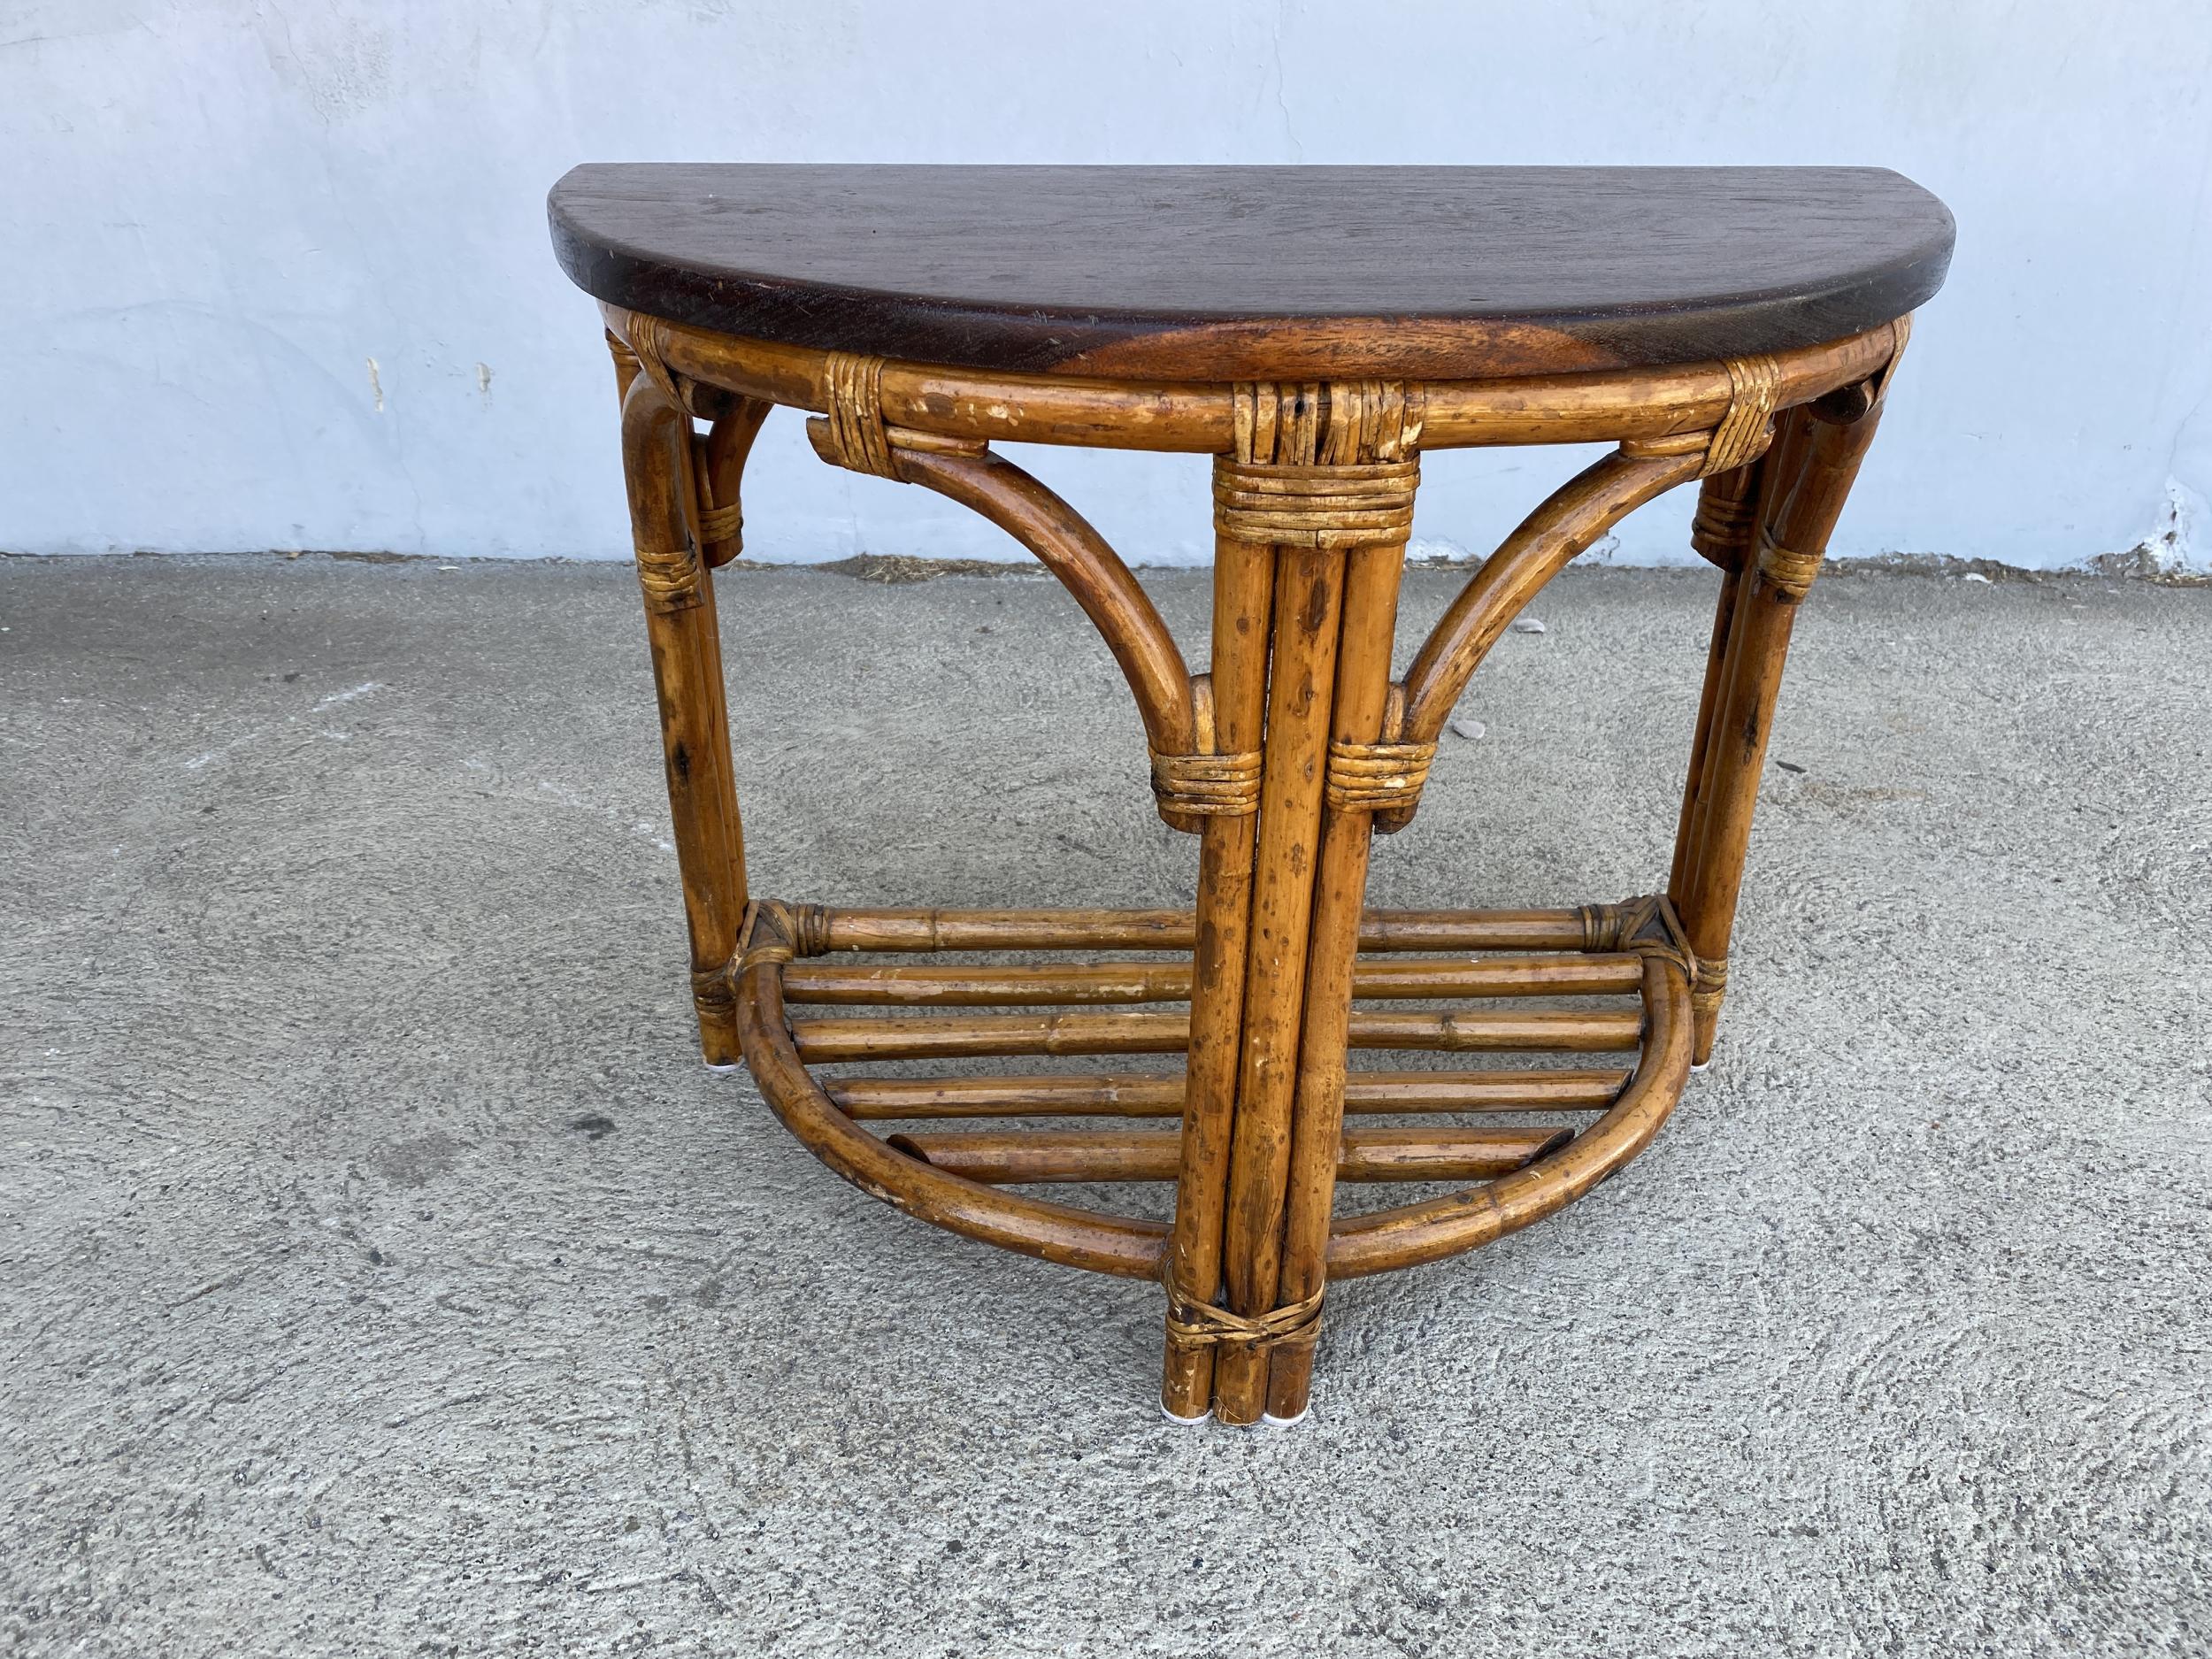 Vintage 1940s two-tier rattan side table featuring stylized three strand legs and beautiful half round mahogany tops. Pair Available

Restored to new for you.

All rattan, bamboo and wicker furniture has been painstakingly refurbished to the